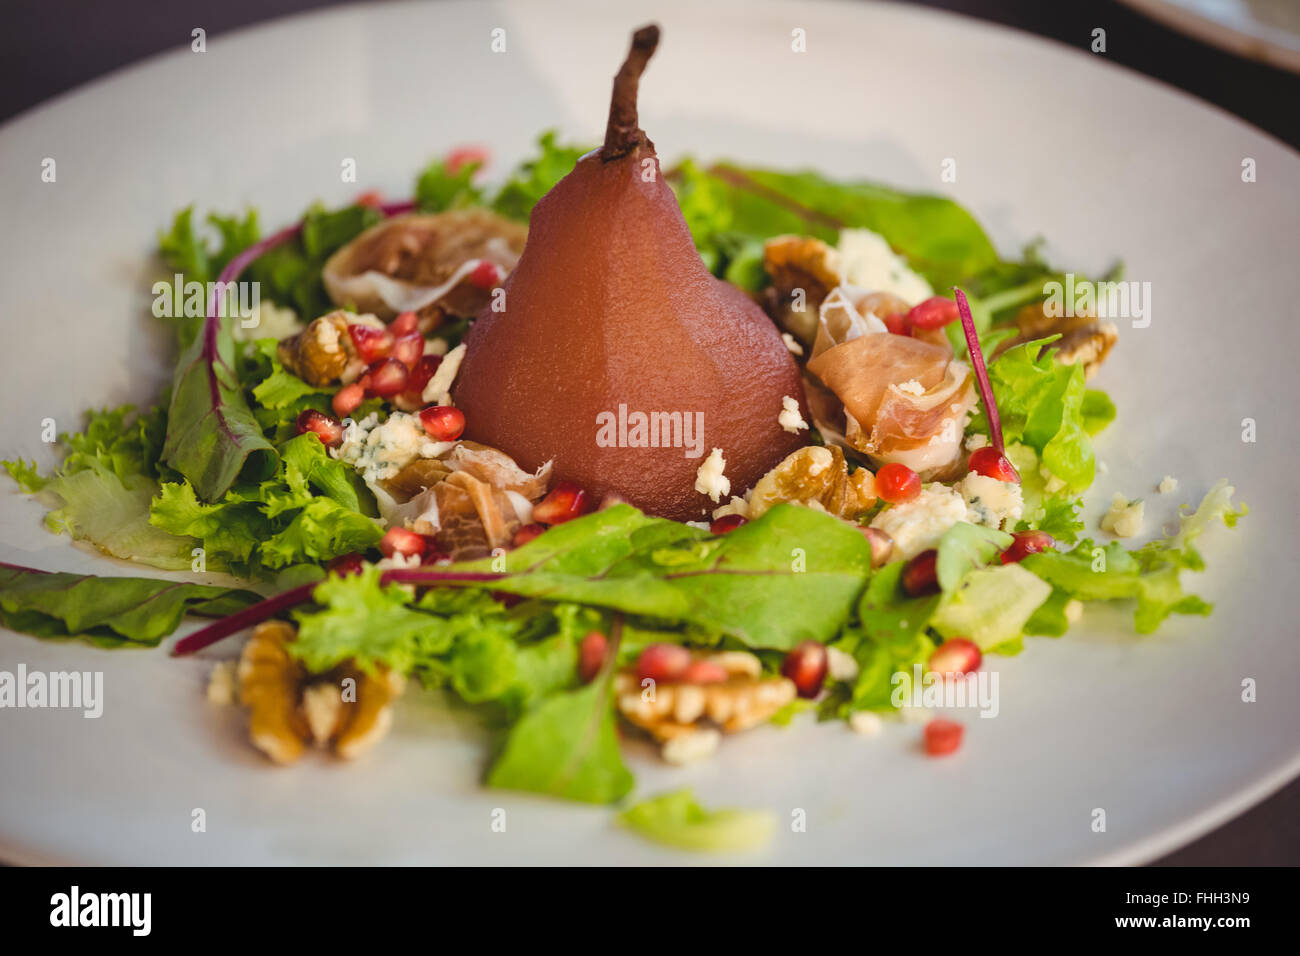 Poached pear with salad Stock Photo